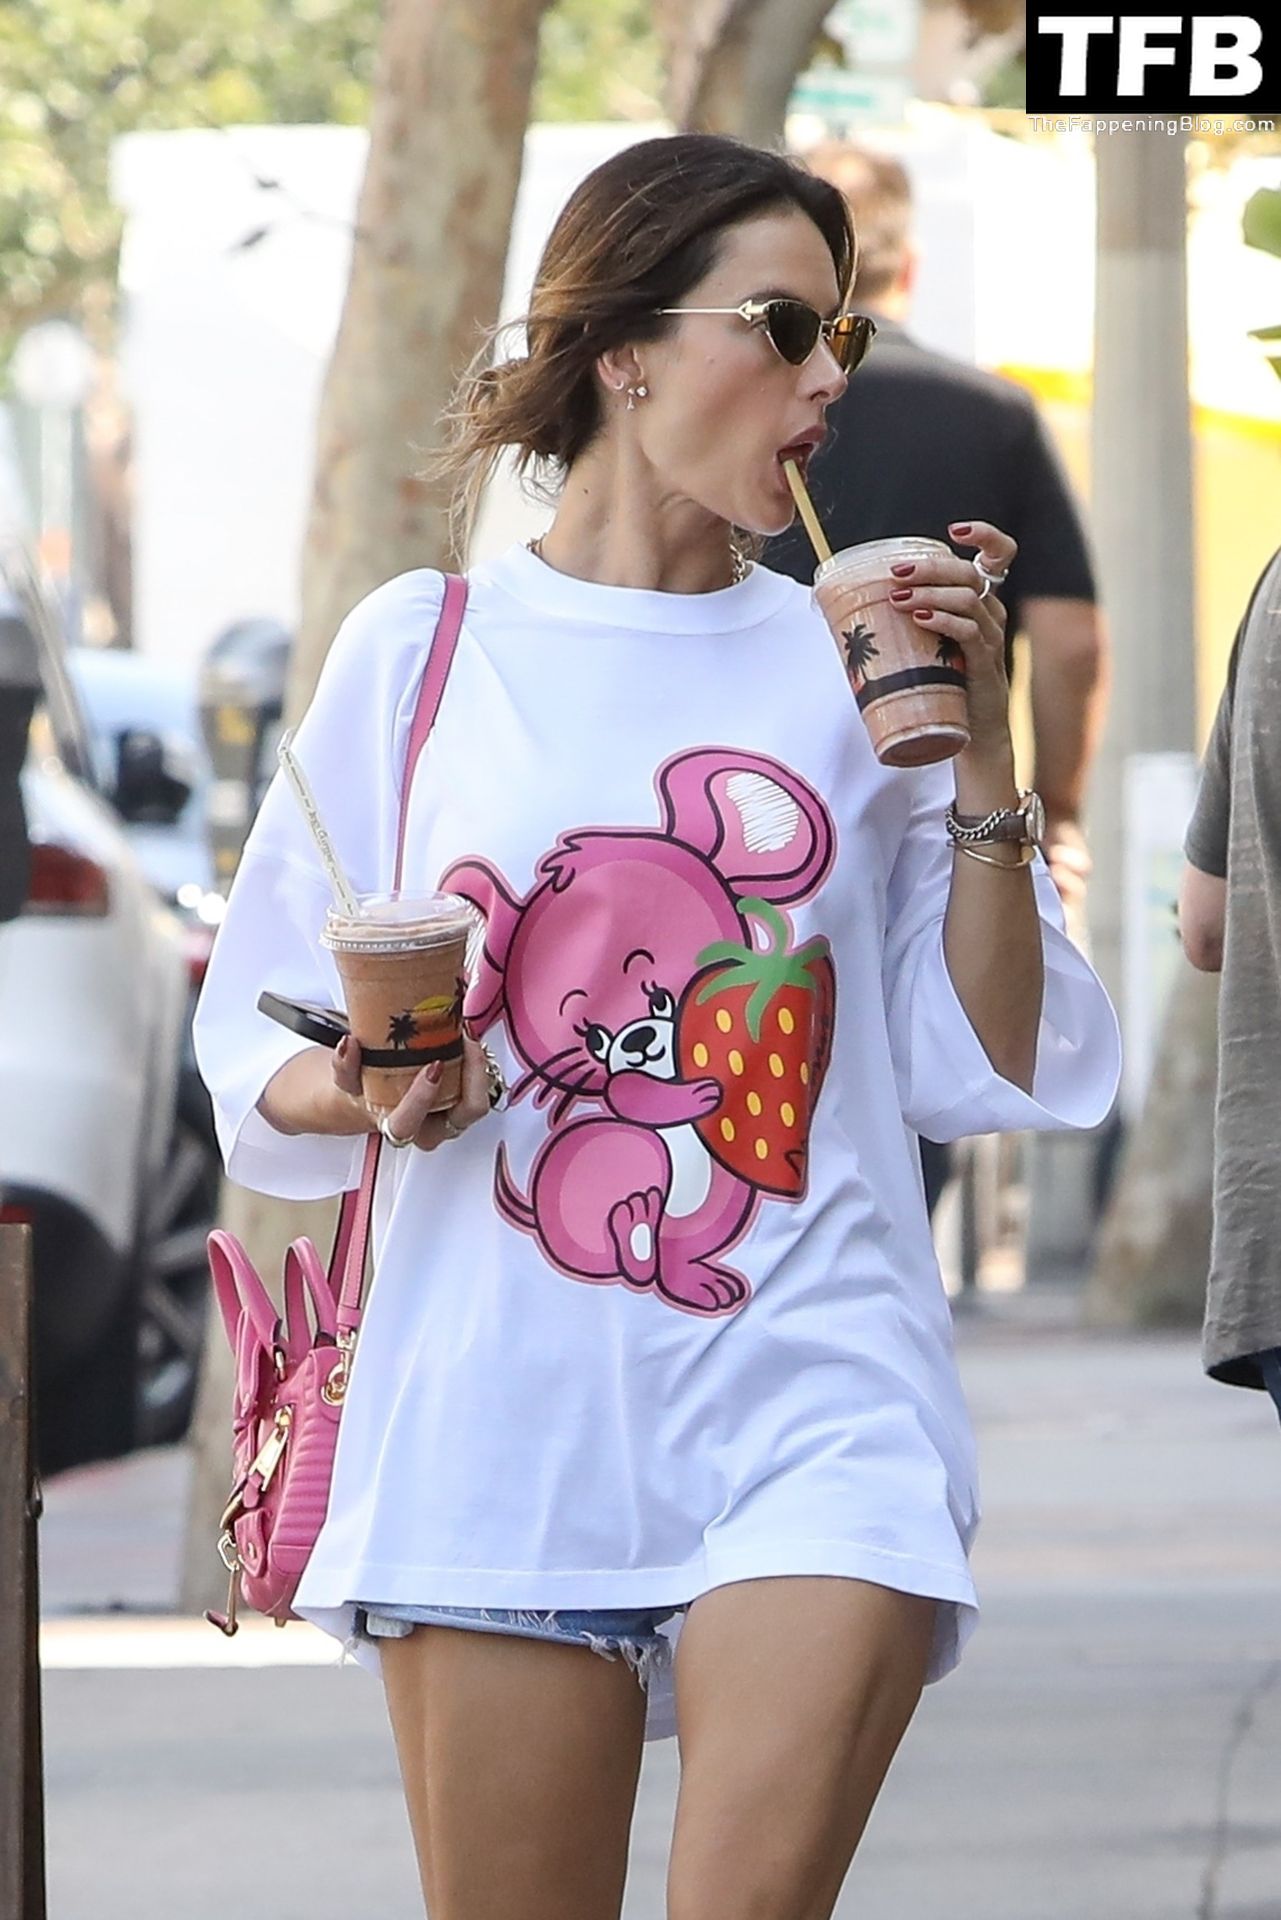 Alessandra Ambrosio Turns the Streets of Brentwood Into a Catwalk (99 Photos)